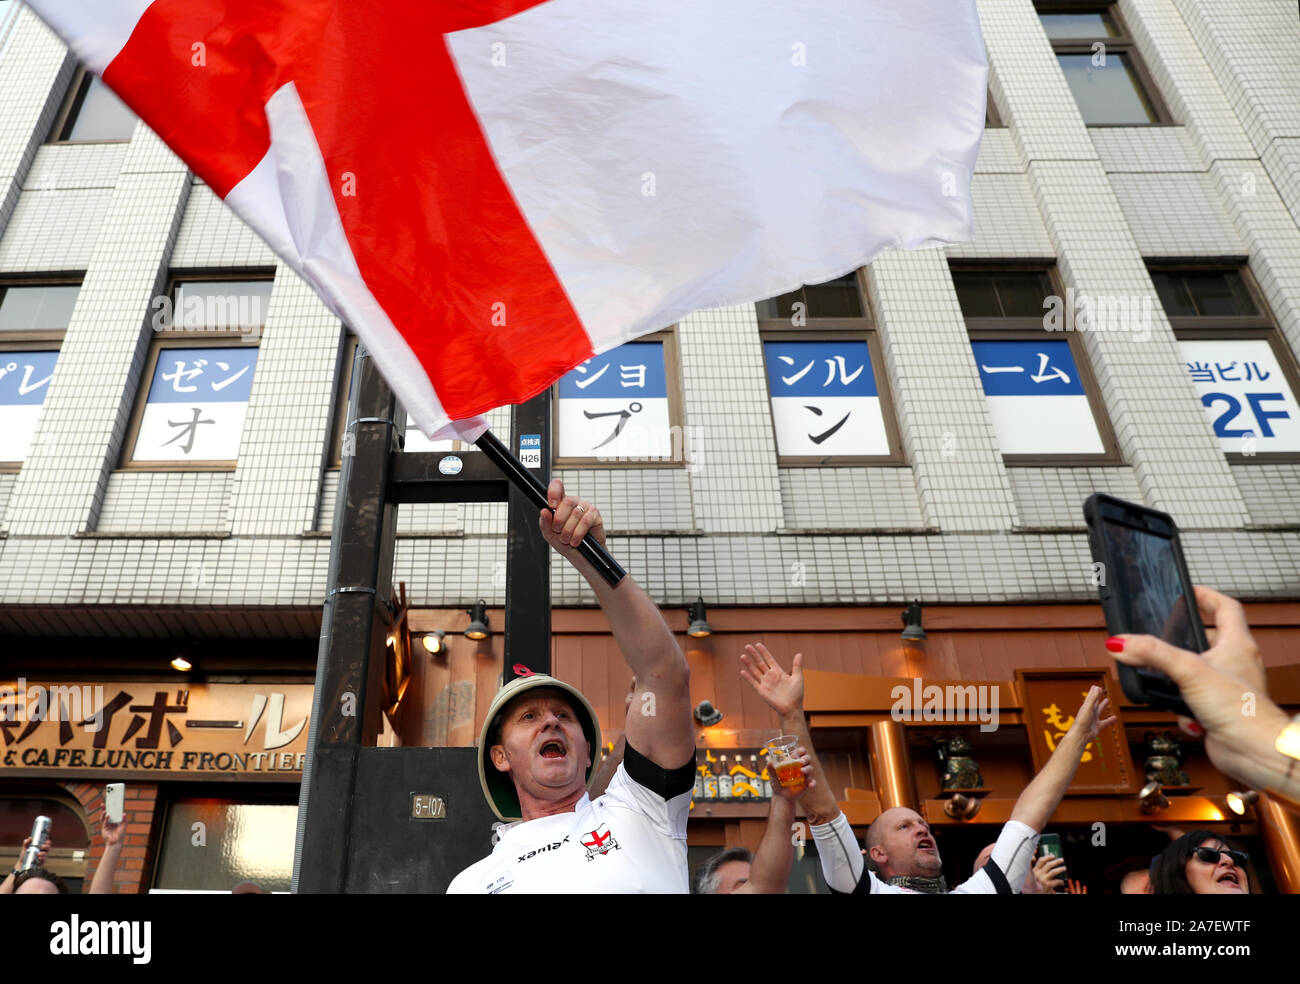 England fans show their support ahead of the 2019 Rugby World Cup final match at Yokohama Stadium. Stock Photo